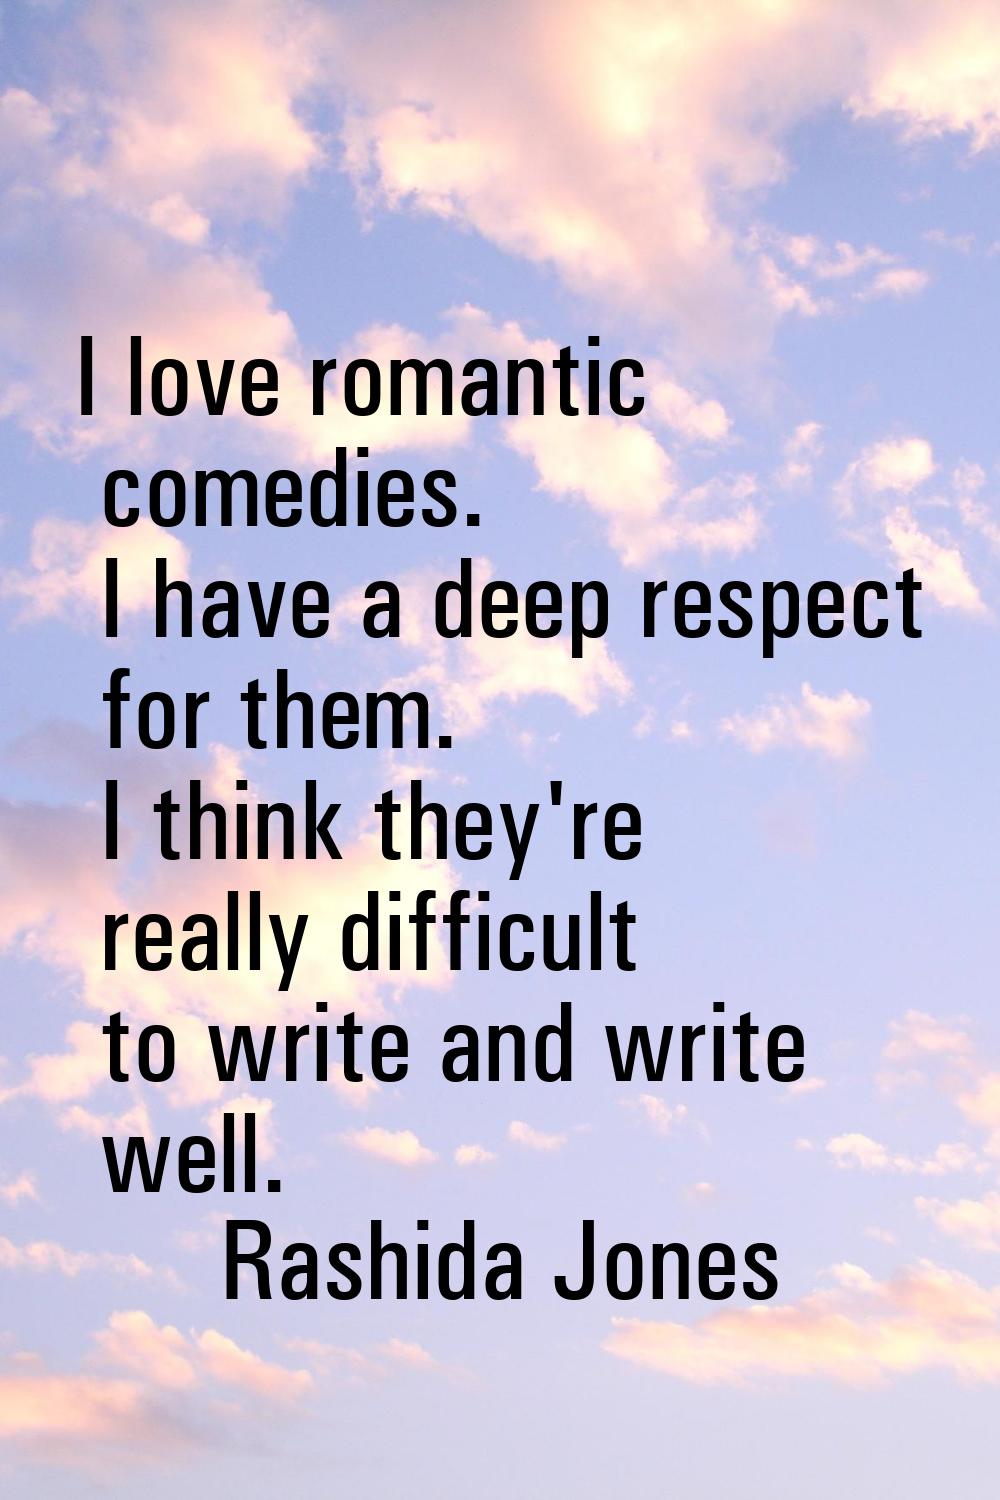 I love romantic comedies. I have a deep respect for them. I think they're really difficult to write